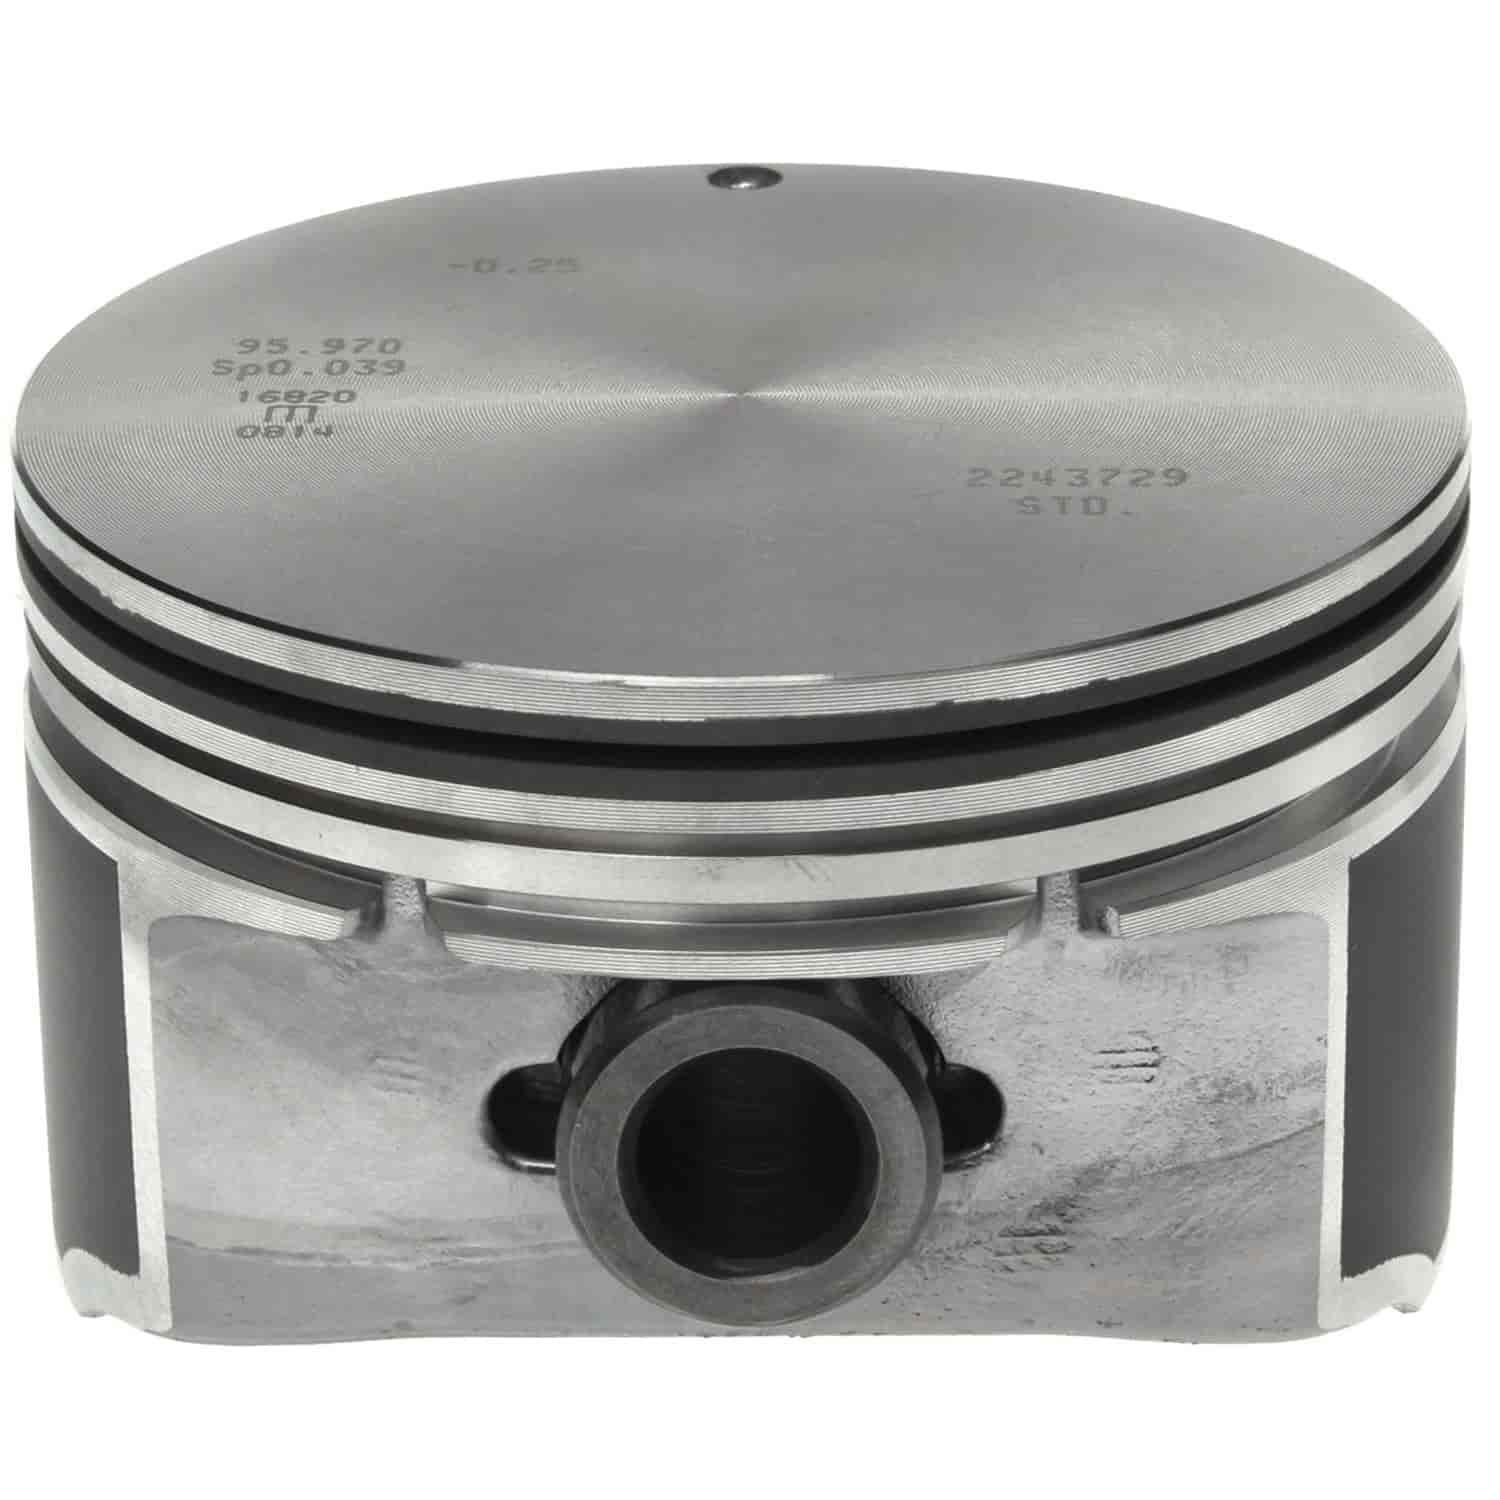 Piston Set 2005-2009 Chevy LS V8 4.8/5.3L with 3.82"/97.0mm Bore (+1.00mm)